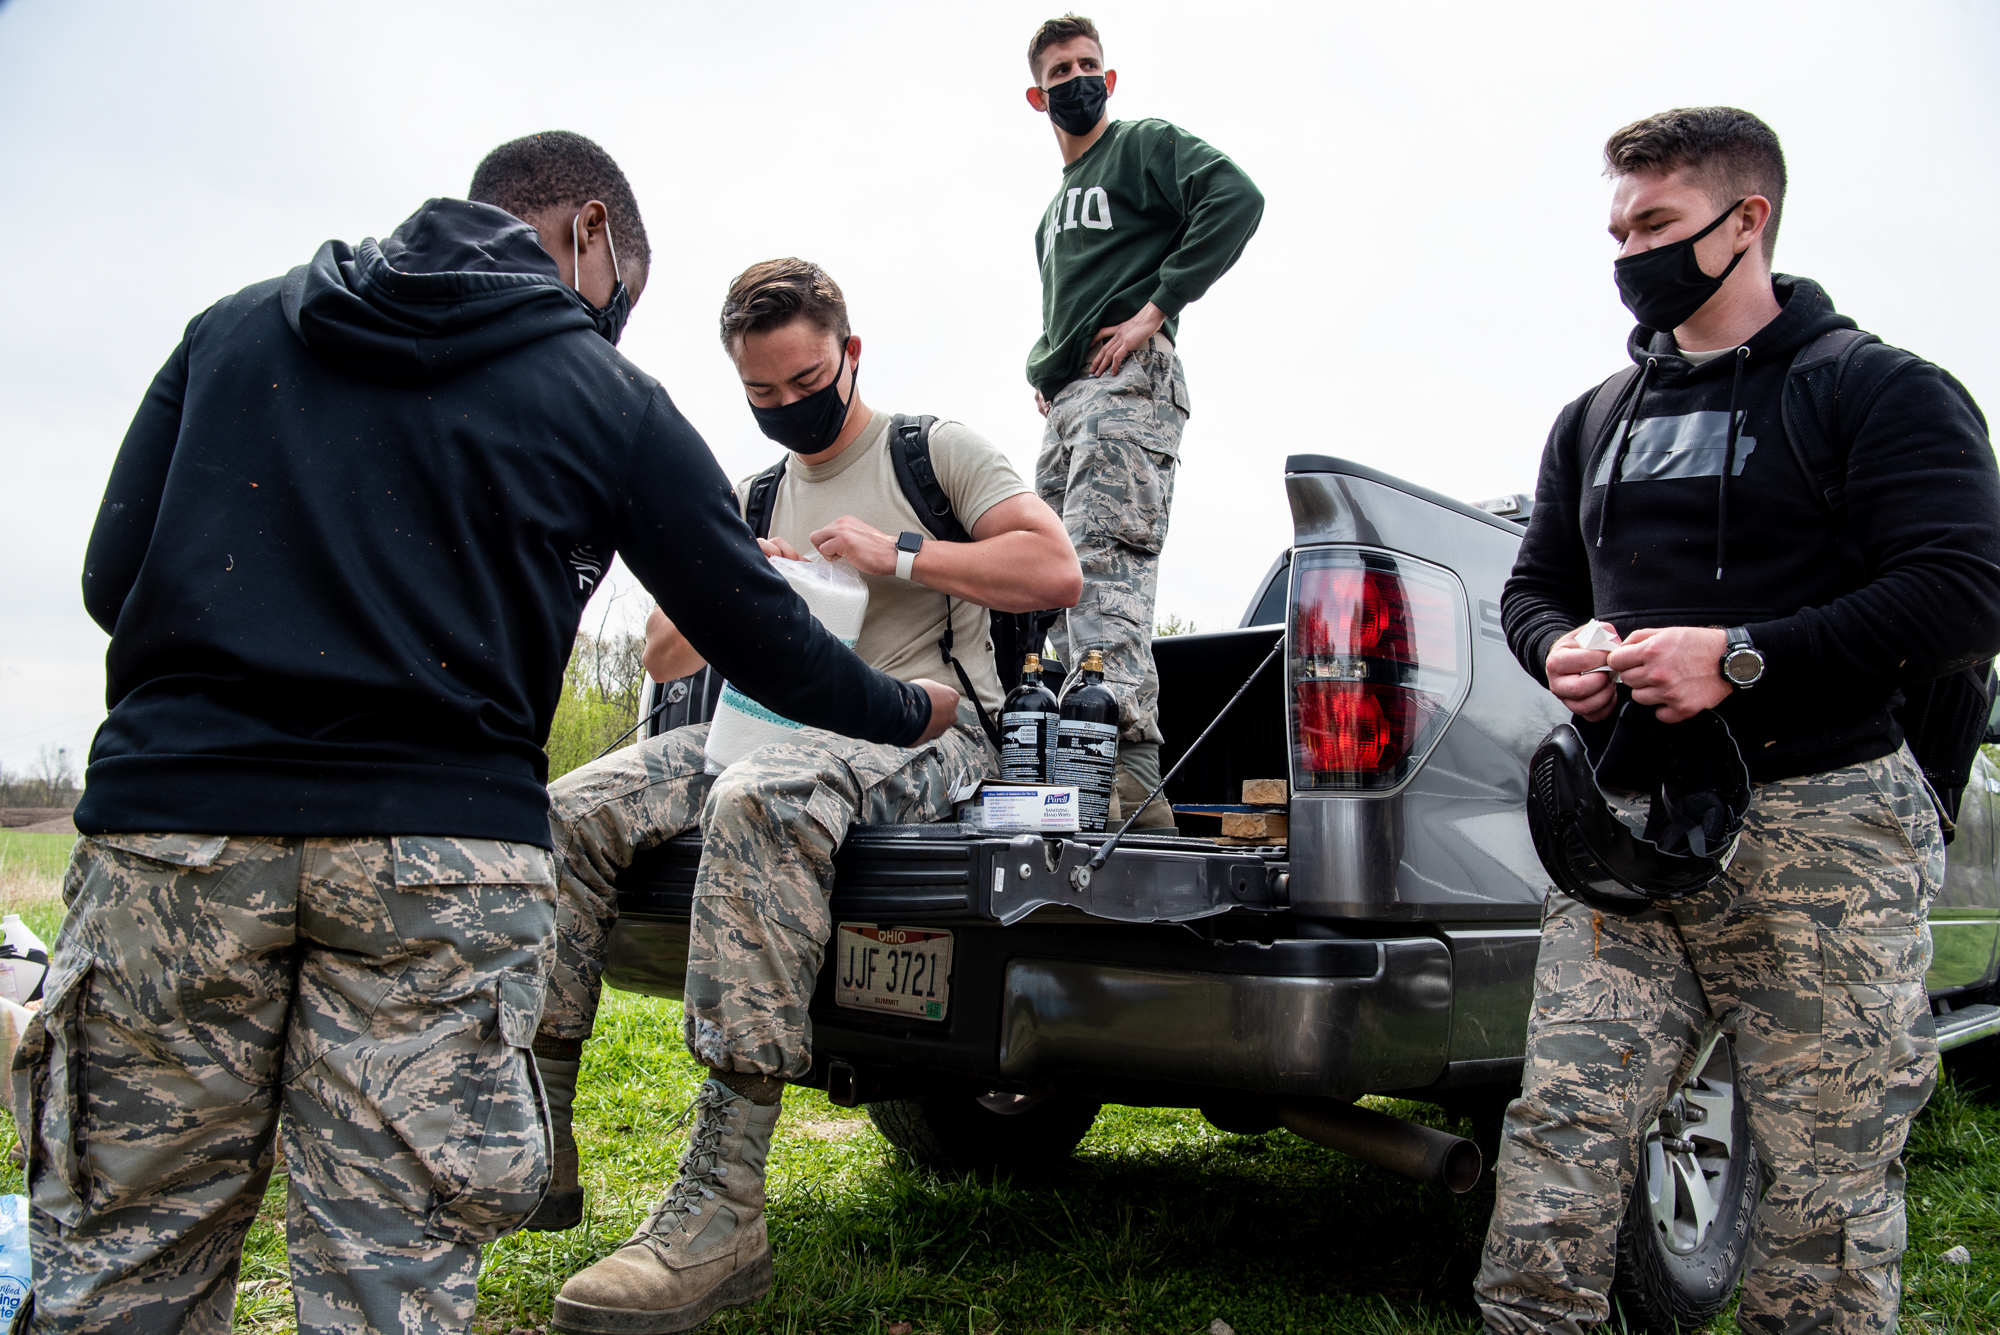 Air Force ROTC members gather behind a pickup truck after a training exercise